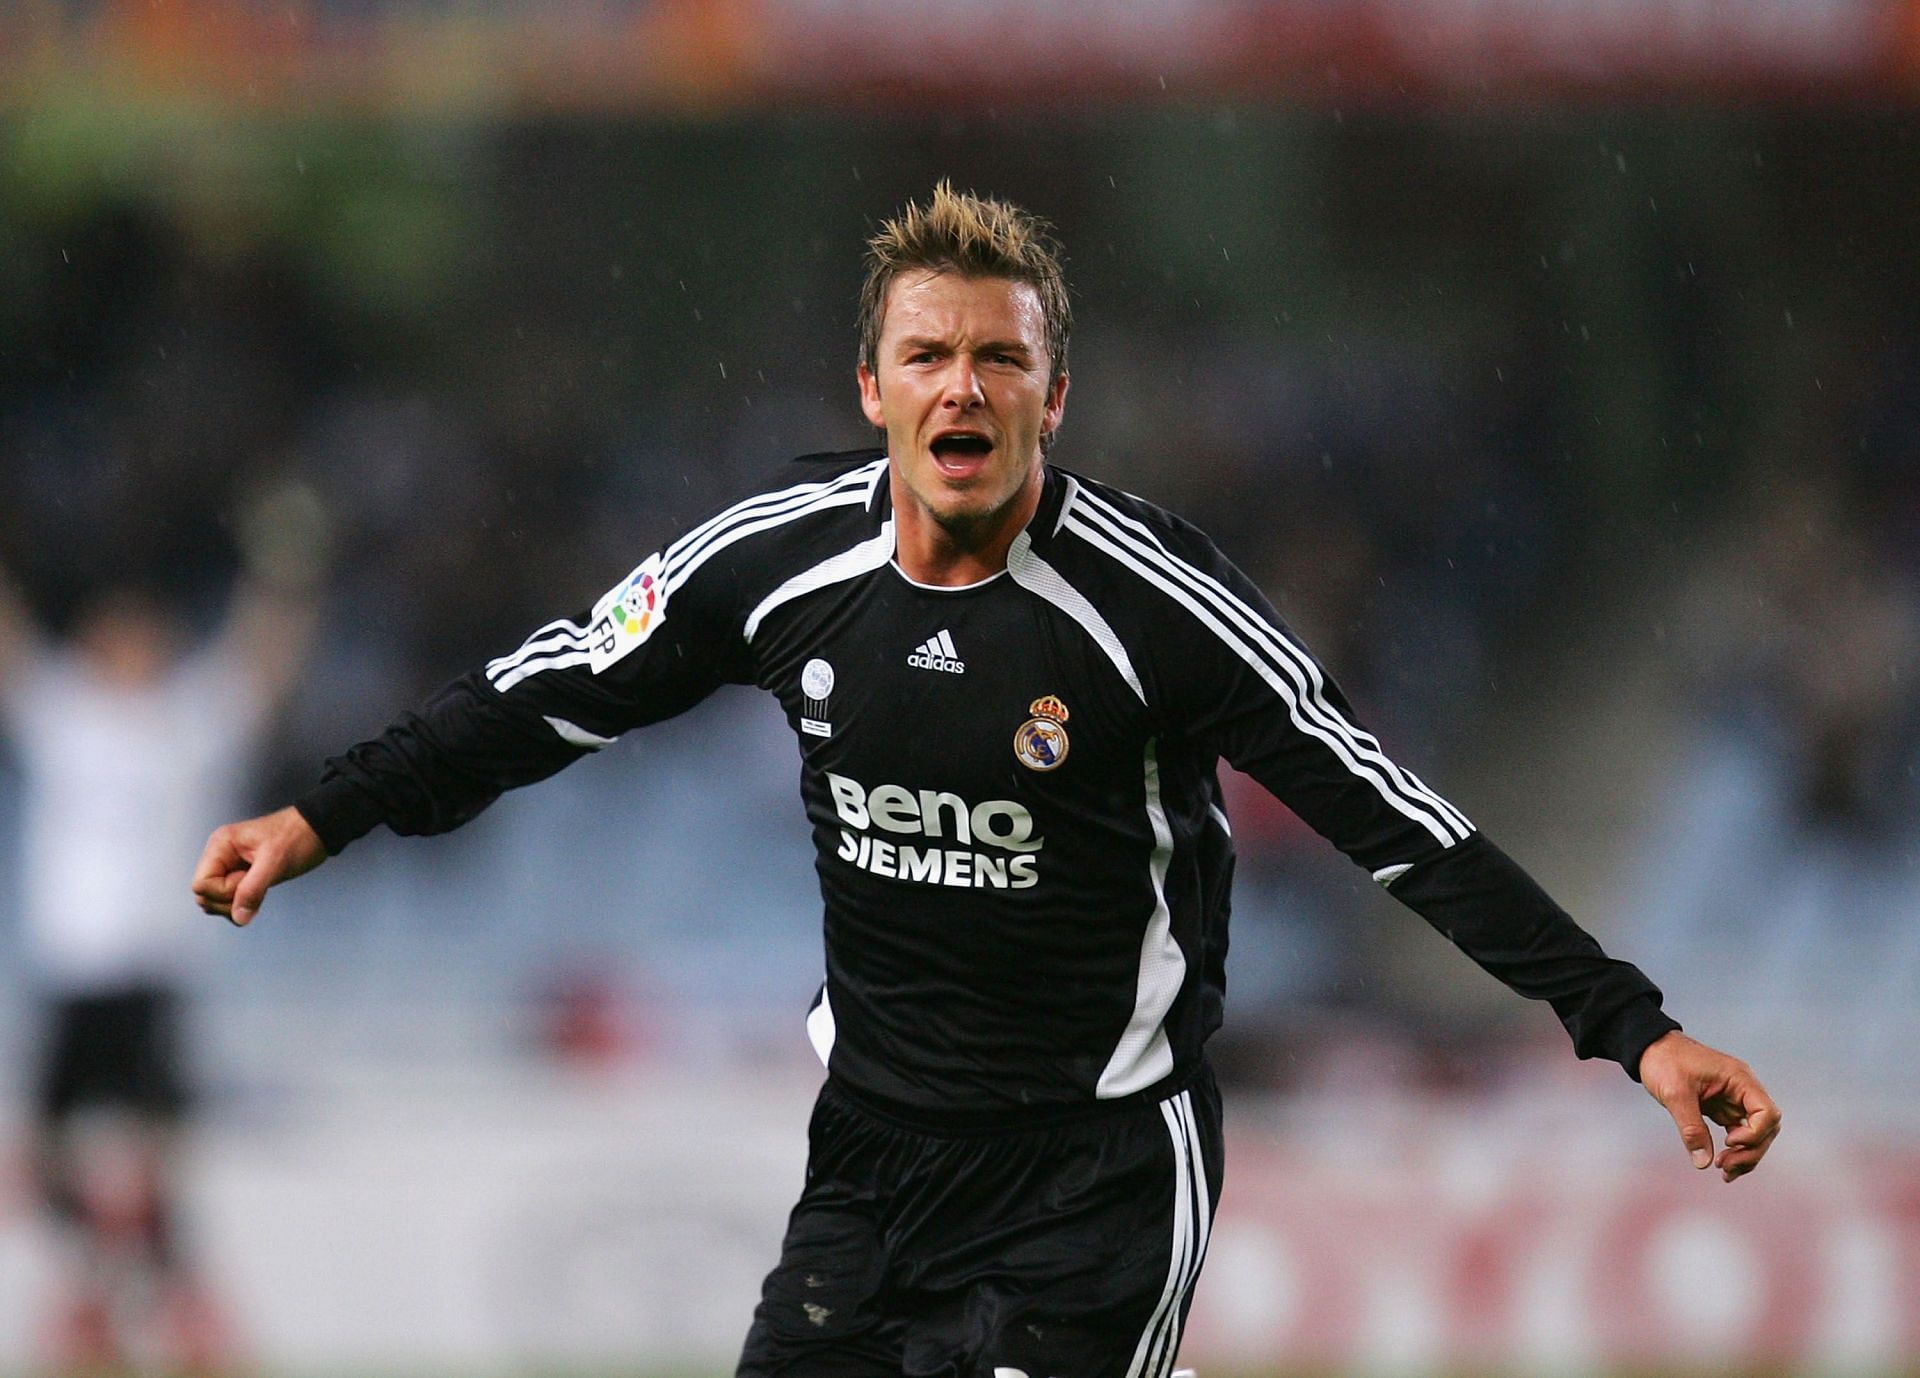 David Beckham in action for Real Madrid